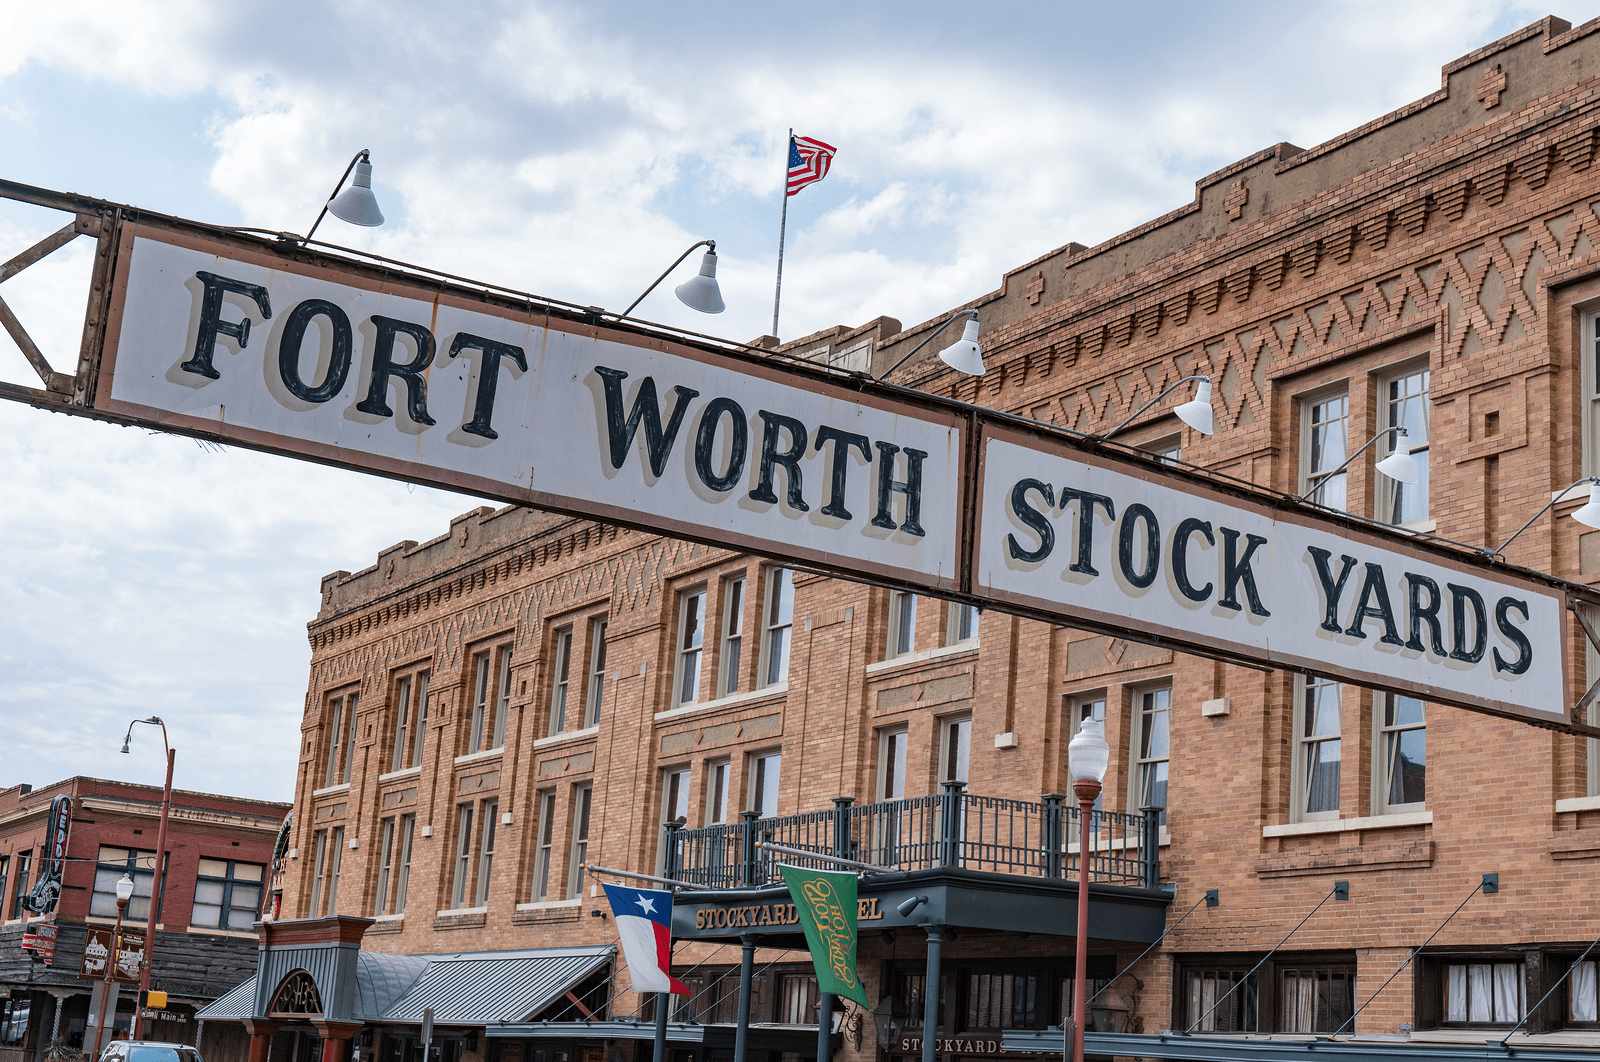 Aerial View of the Fort Worth Stockyards - The Portal to Texas History